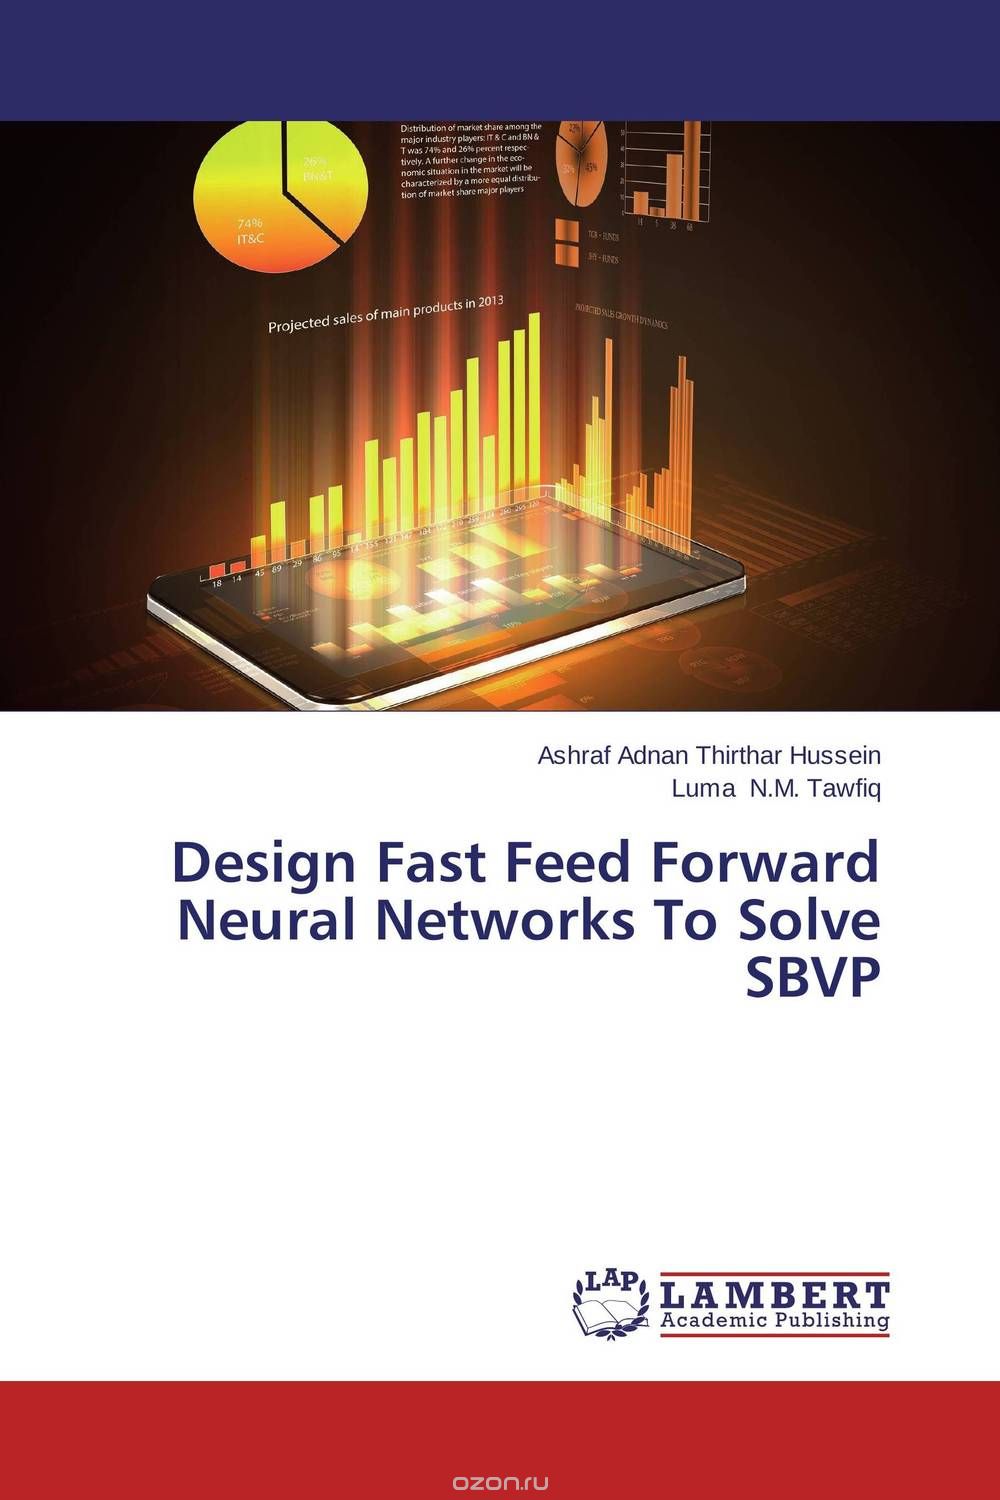 Design Fast Feed Forward Neural Networks To Solve SBVP